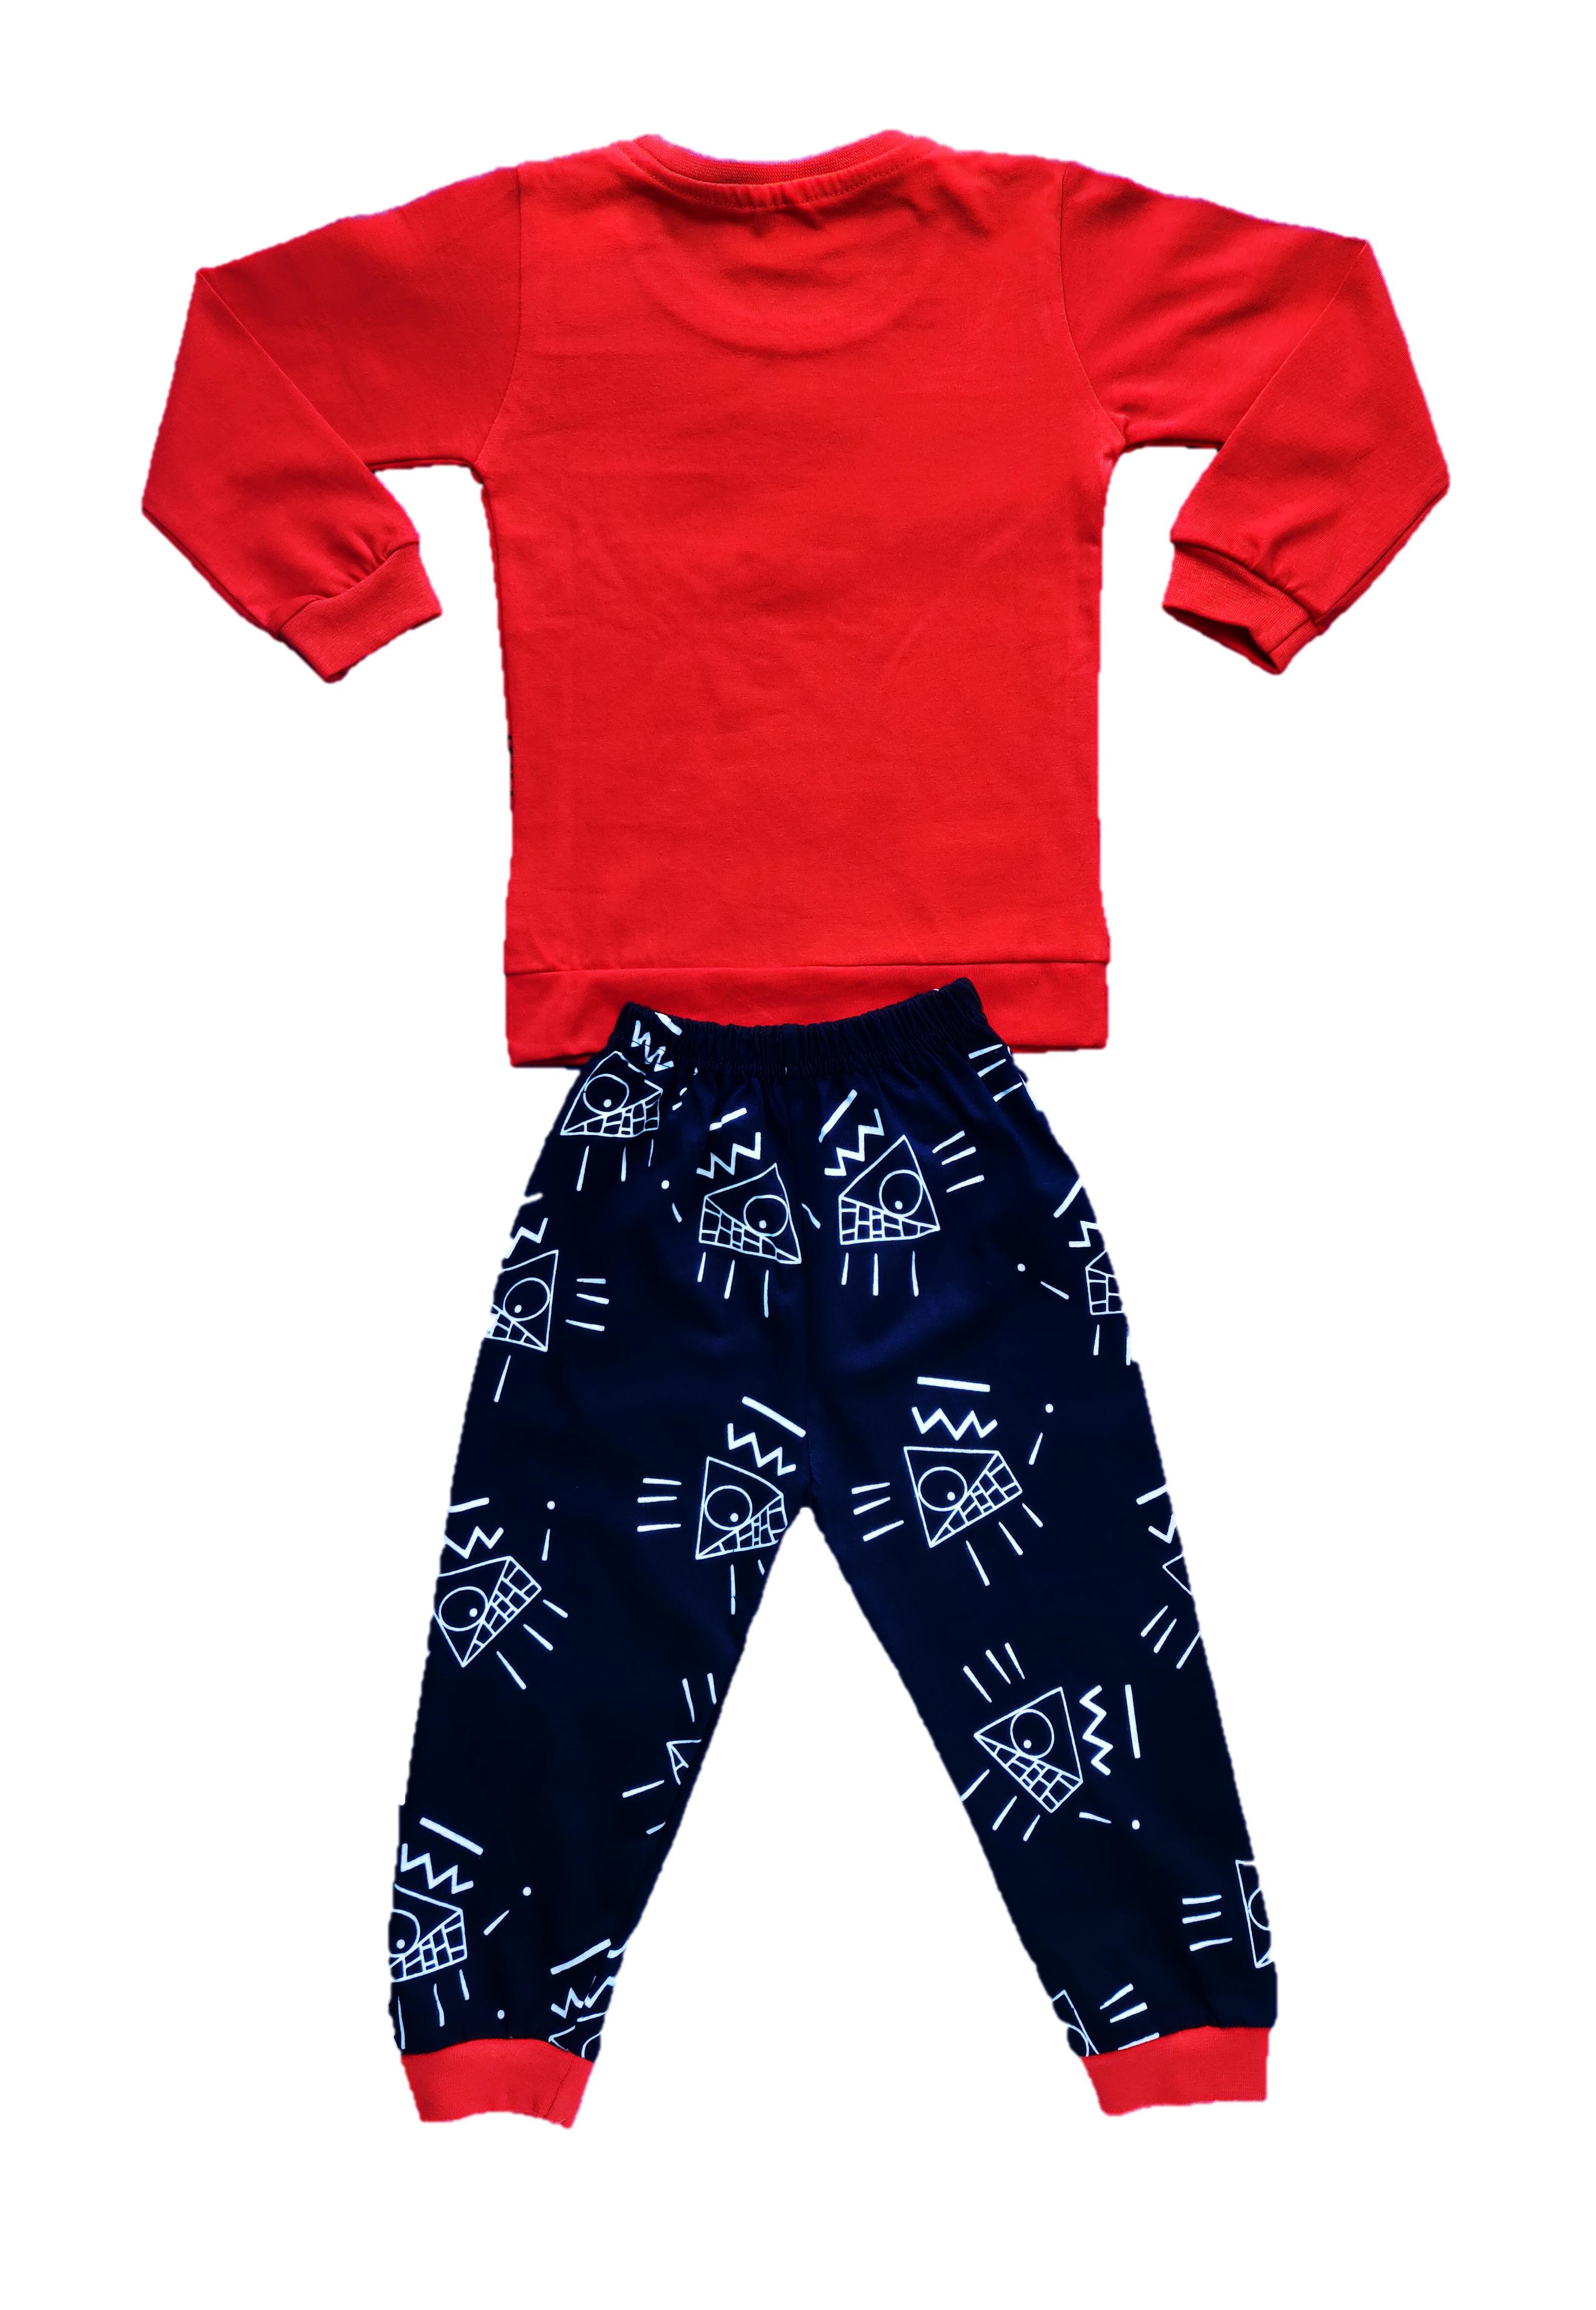 Kids Pizza Printed Cotton Top And Pant Red